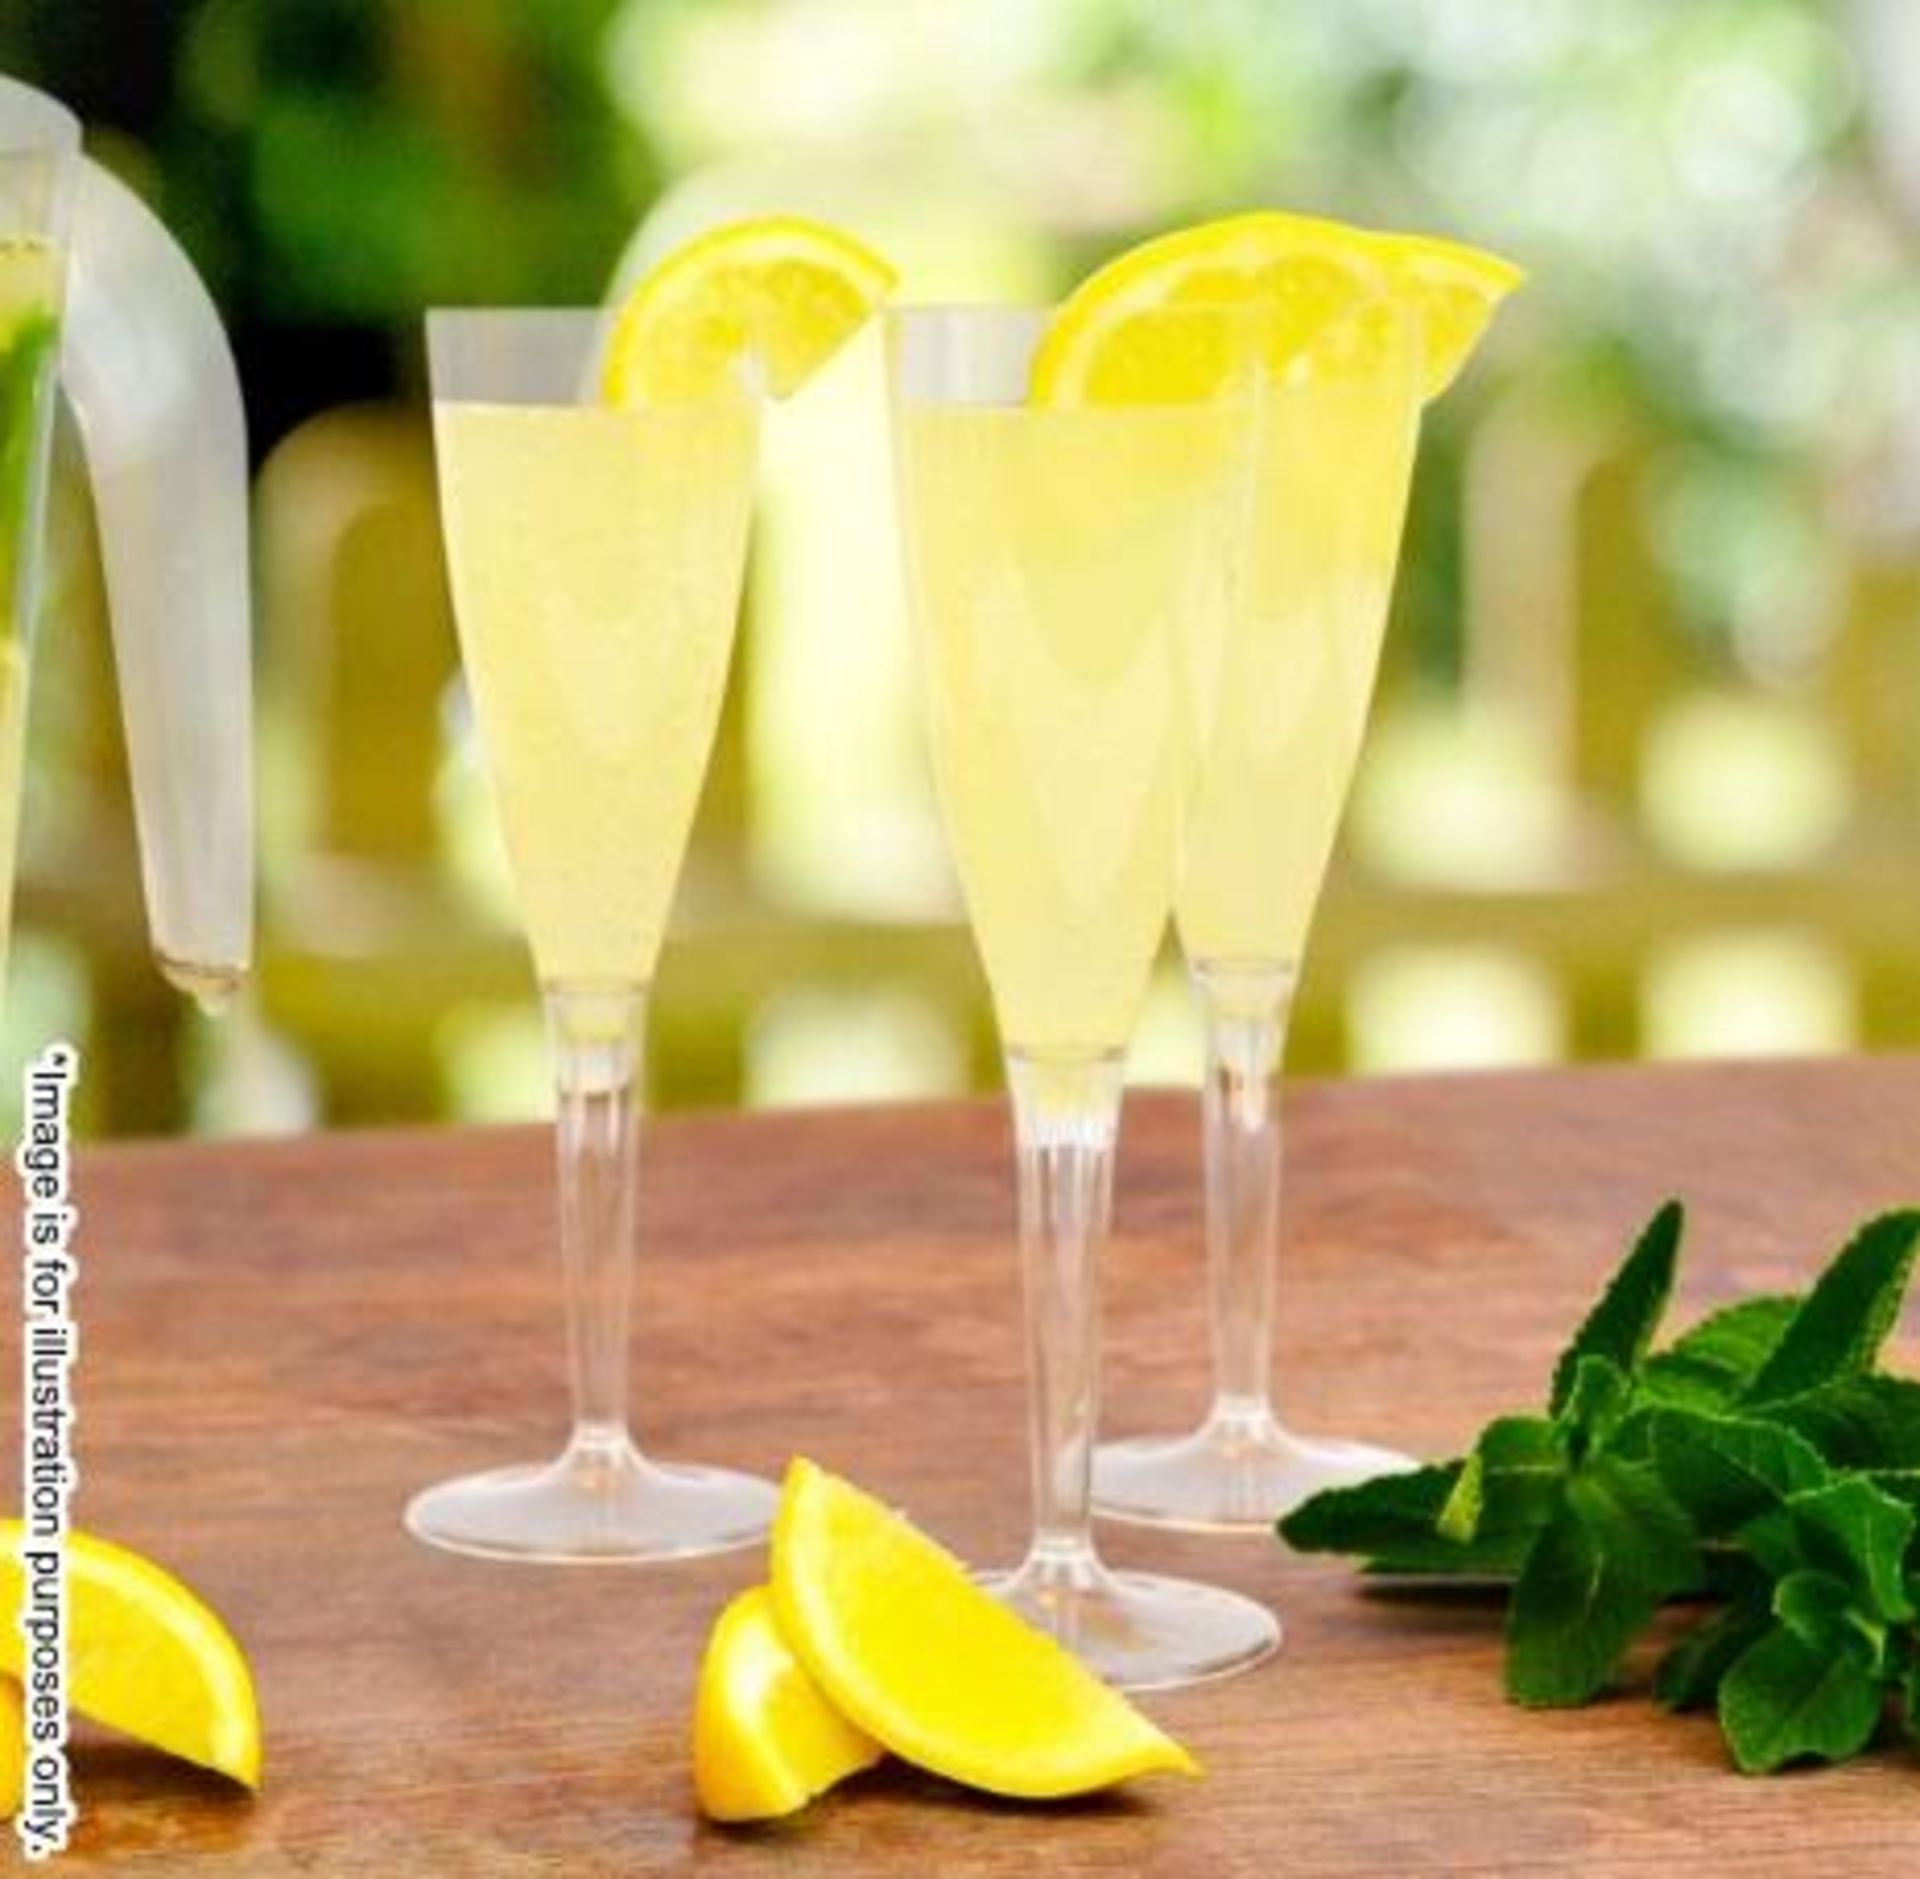 400 x Disposable Clear Plastic Champagne Flutes (170ml) - Brand: Remmerco CG111P - Brand New - Image 3 of 4